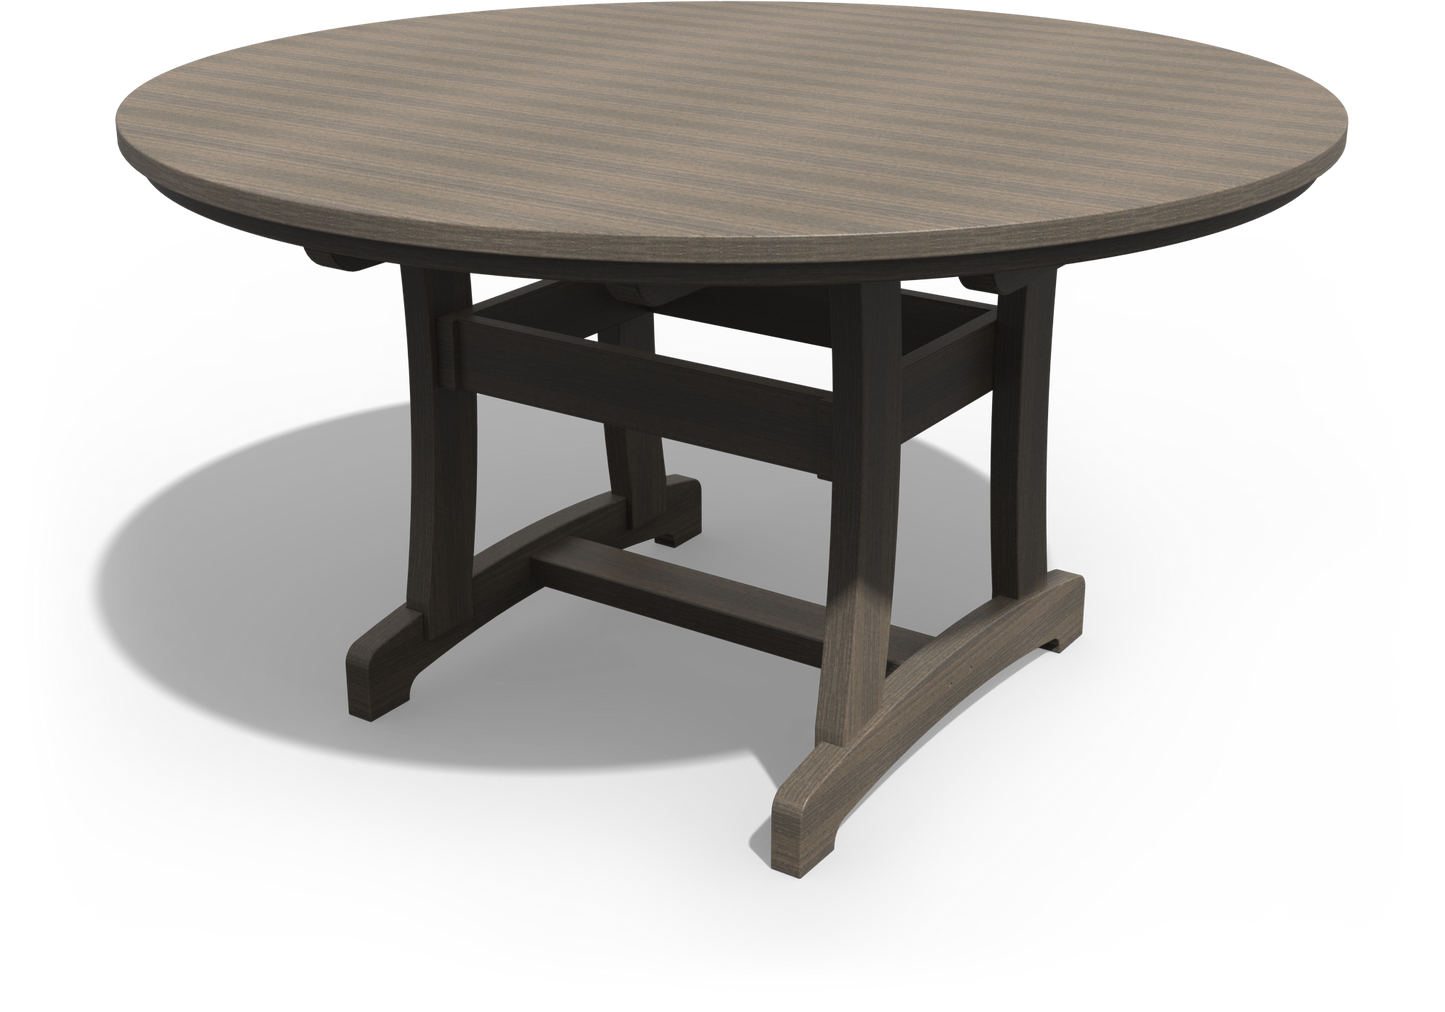 Patiova Recycled Plastic 54" Round Legacy Dining Table - LEAD TIME TO SHIP 3 WEEKS